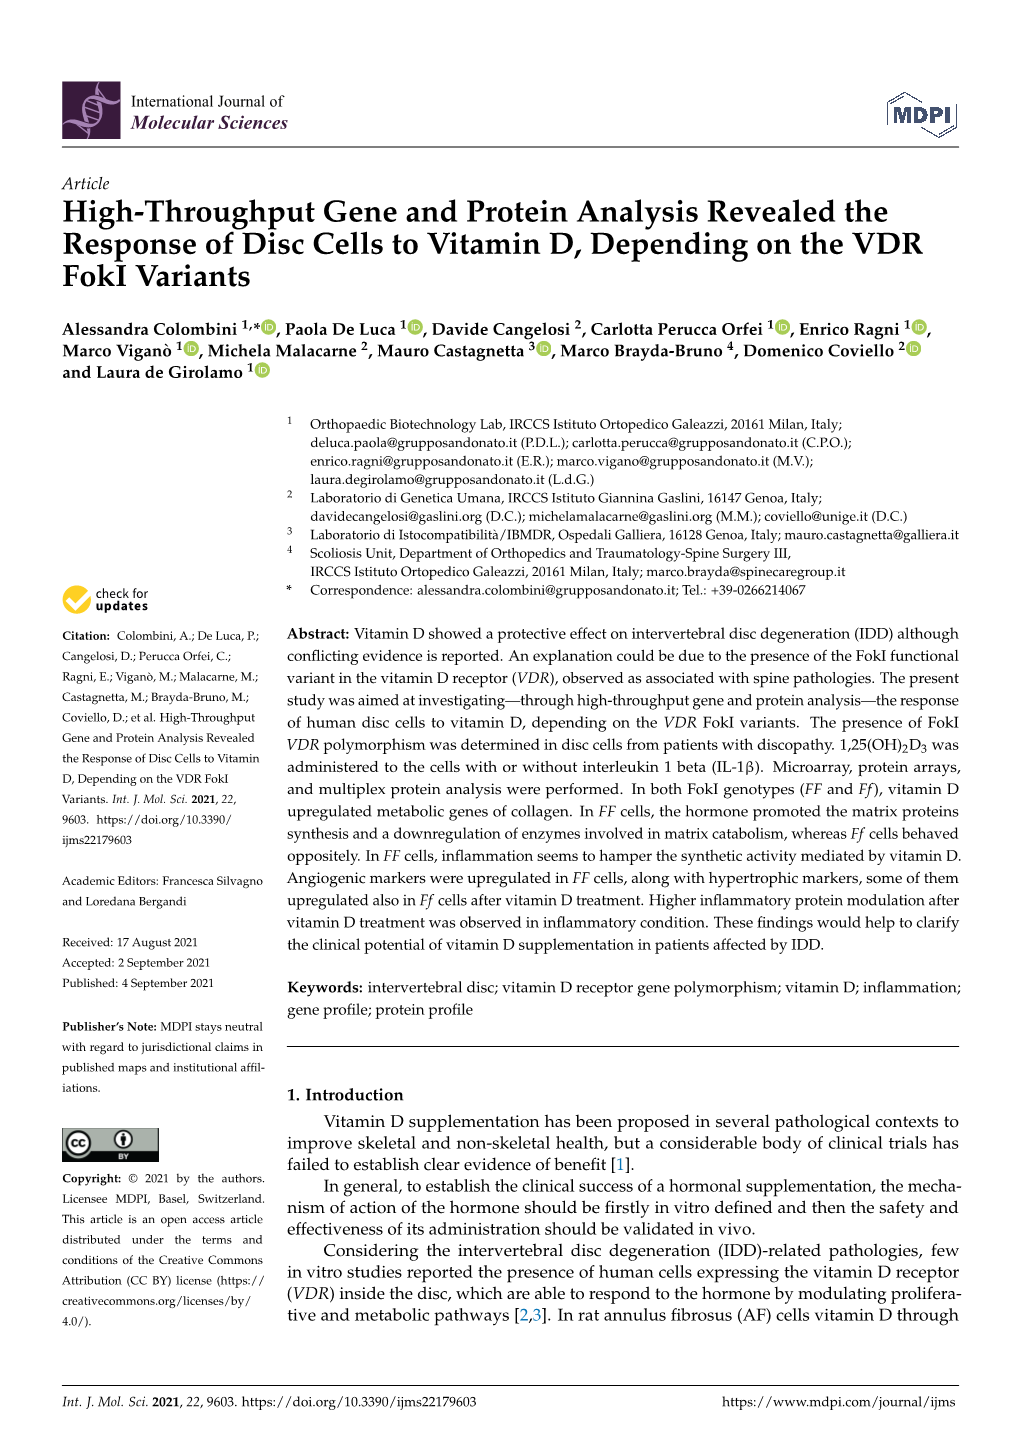 High-Throughput Gene and Protein Analysis Revealed the Response of Disc Cells to Vitamin D, Depending on the VDR Foki Variants